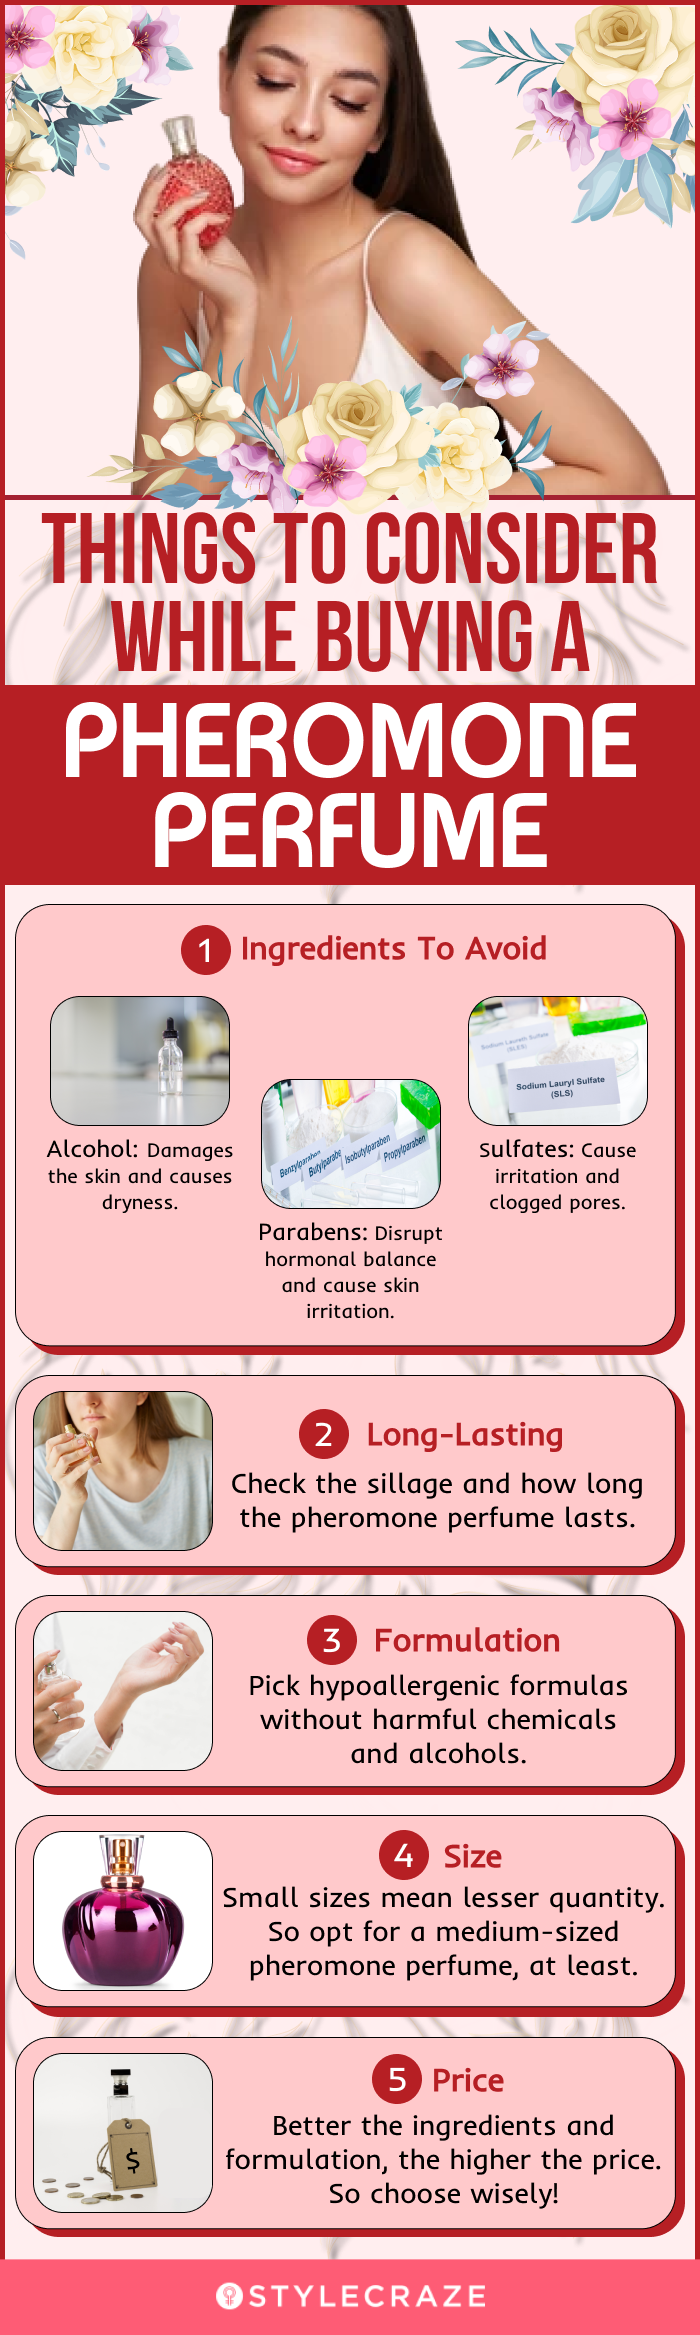 Things To Consider While Buying A Pheromone Perfume